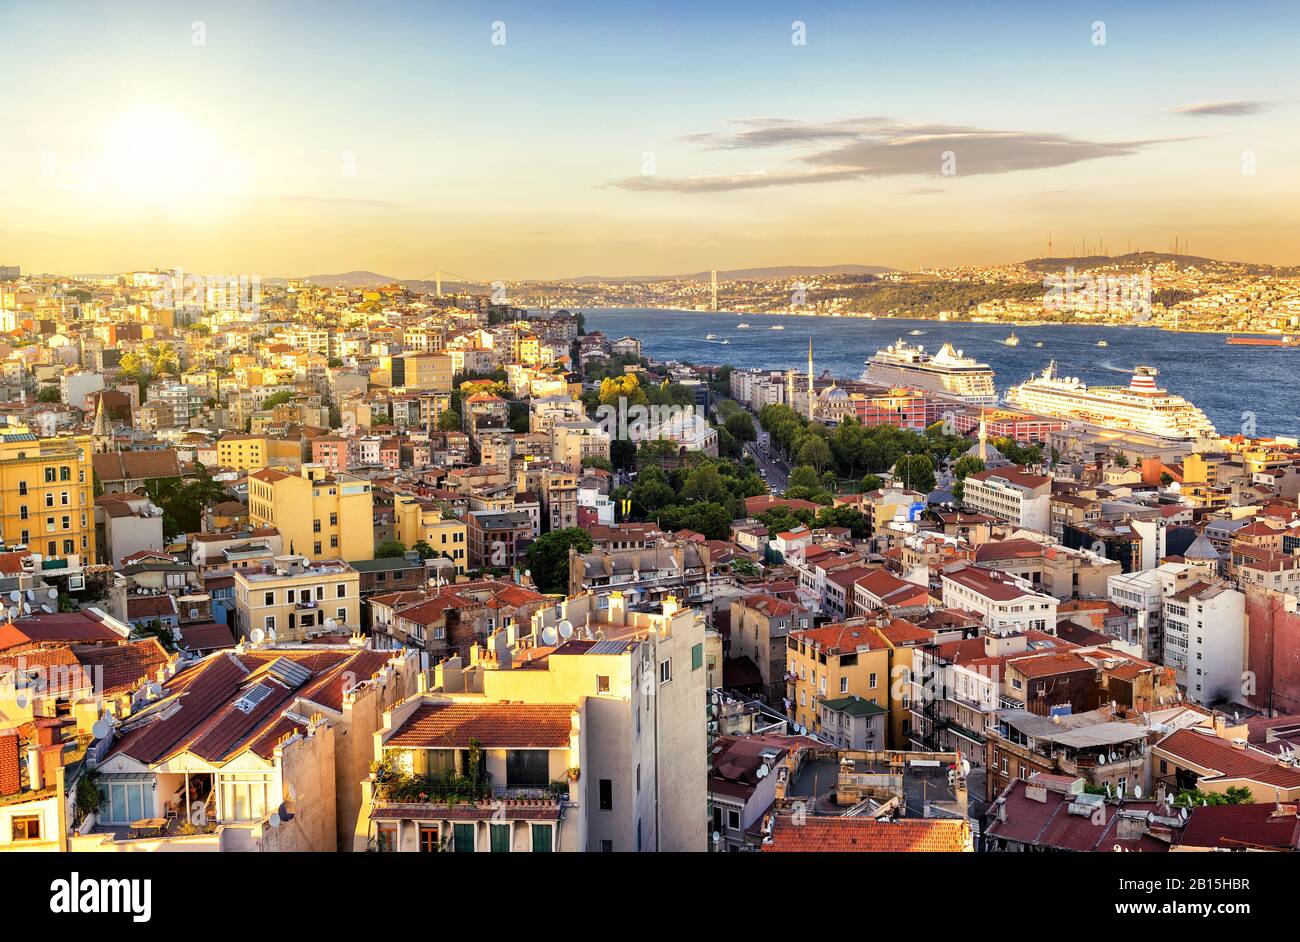 Istanbul at sunset, Turkey. Bosphorus divides the city into the Asian and European parts. View from the European side. Stock Photo